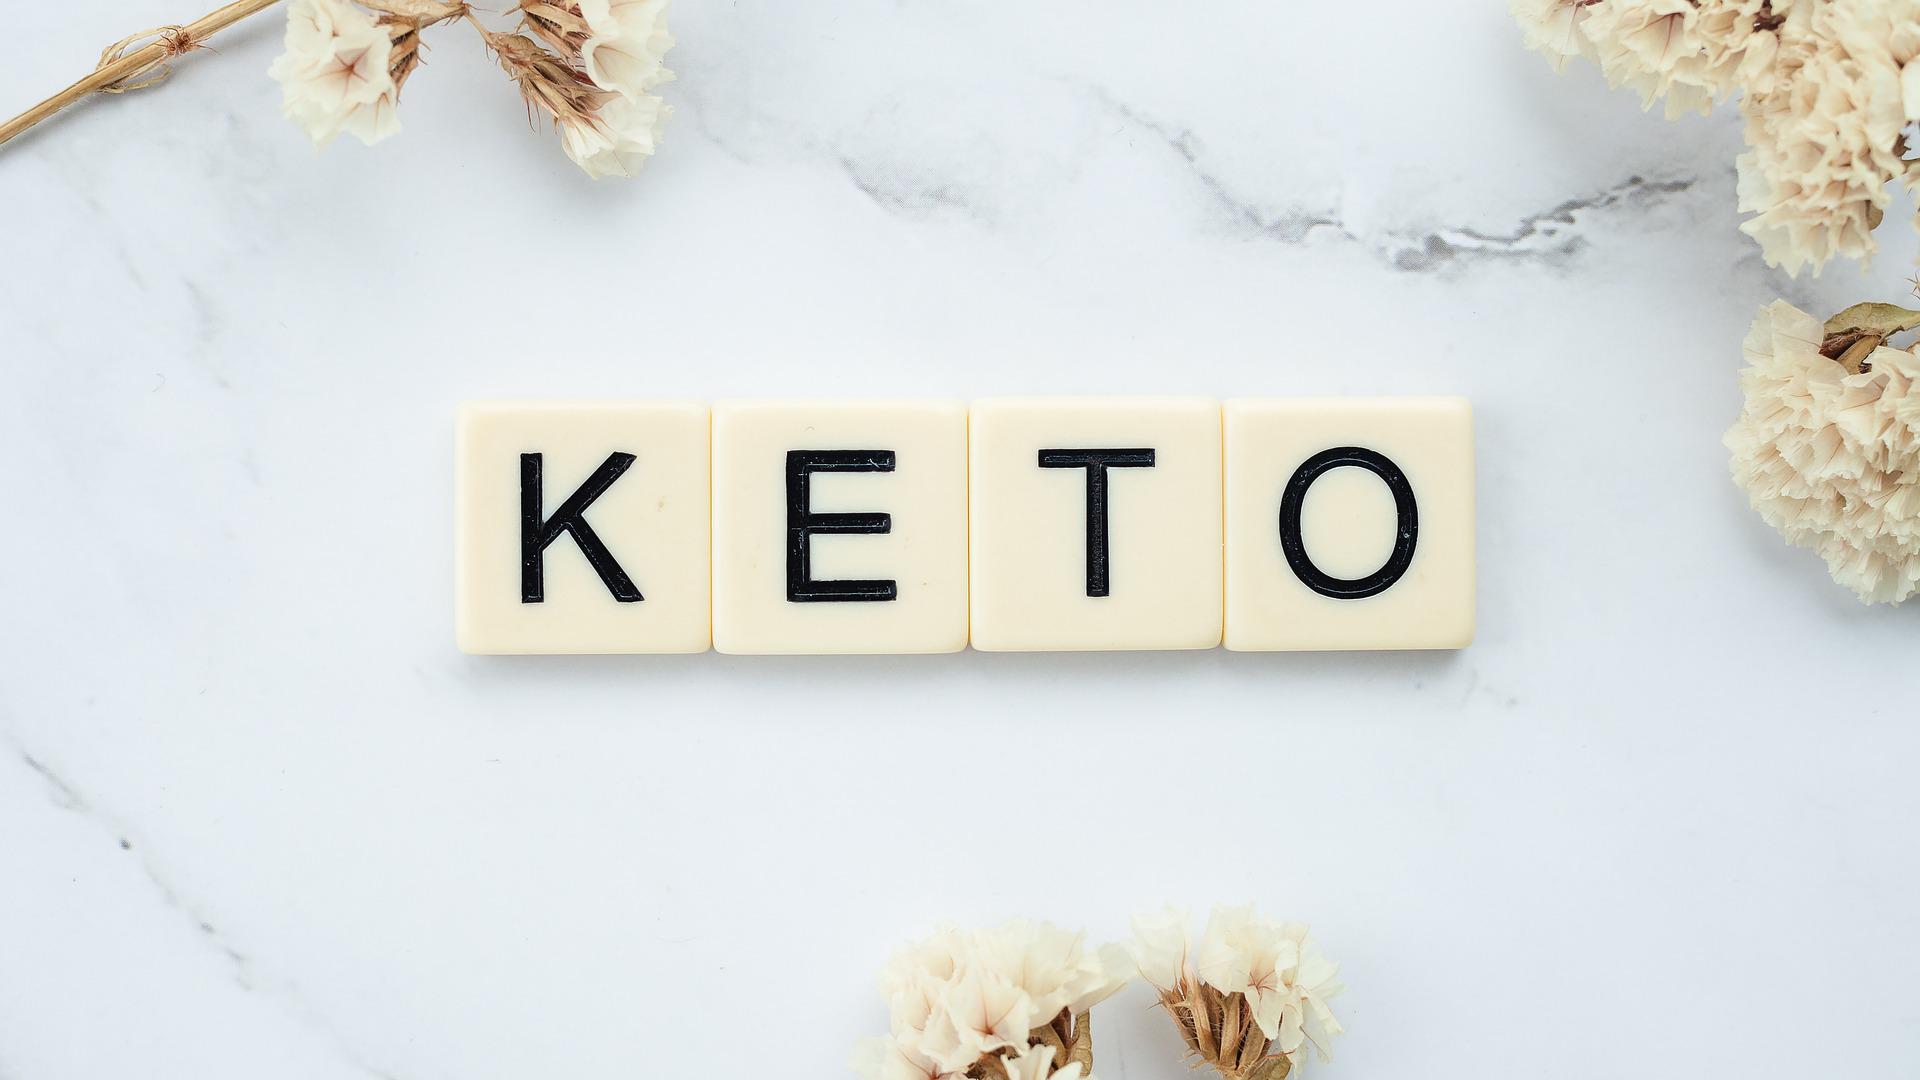 The word Keto spelled on some scrabble tiles sitting on a white surface